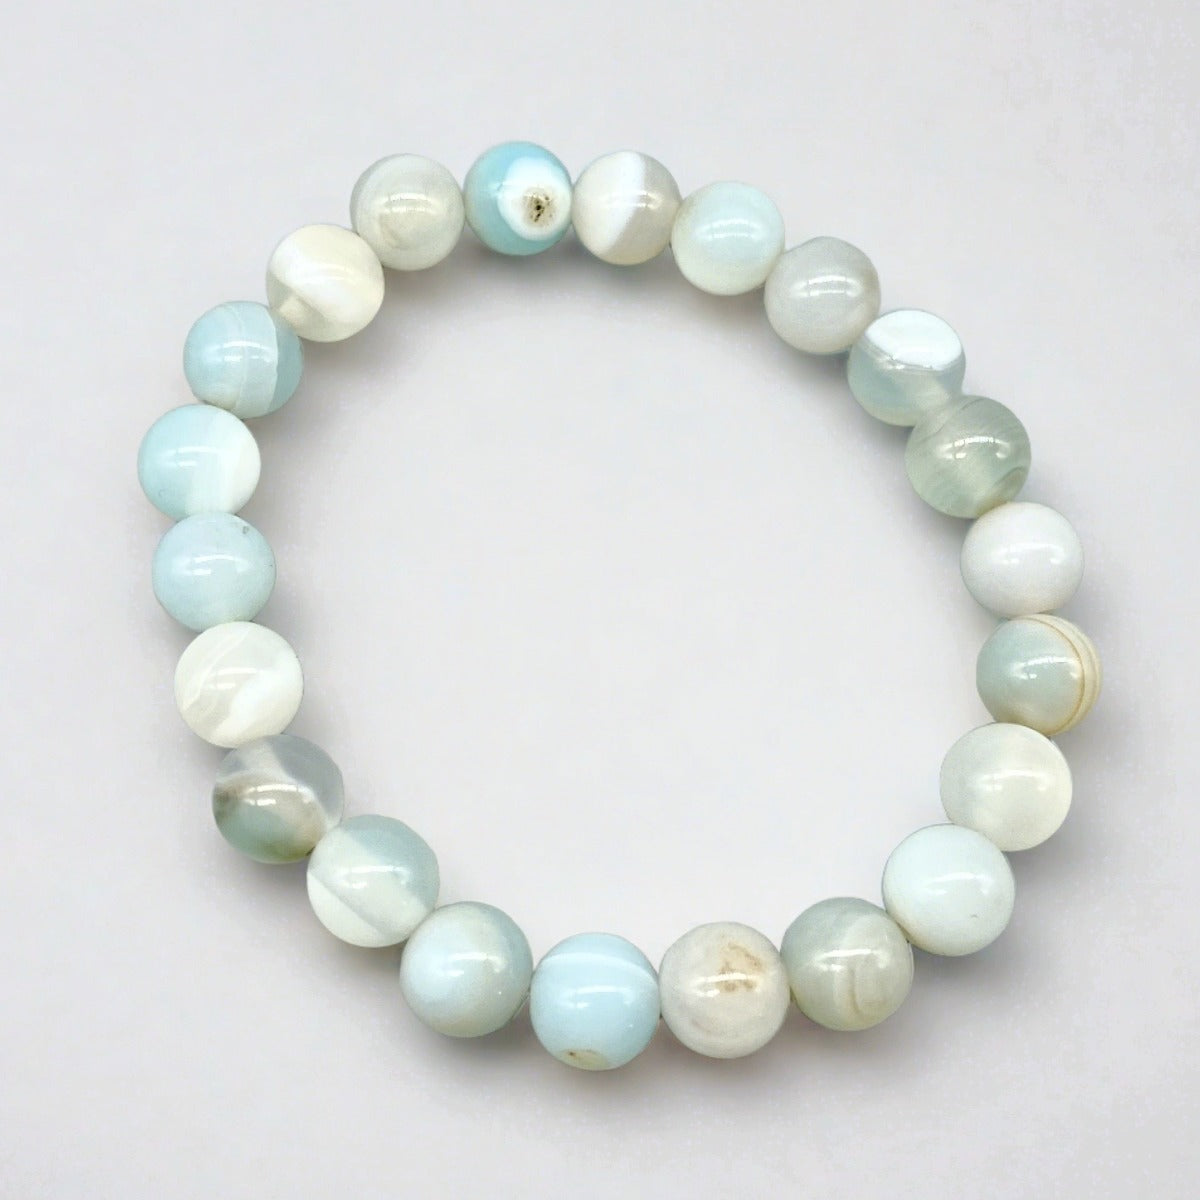 Arctic Blue Agate Loving Kindness Bracelet: A serene bracelet featuring arctic blue agate stones, evoking feelings of tranquility and compassion